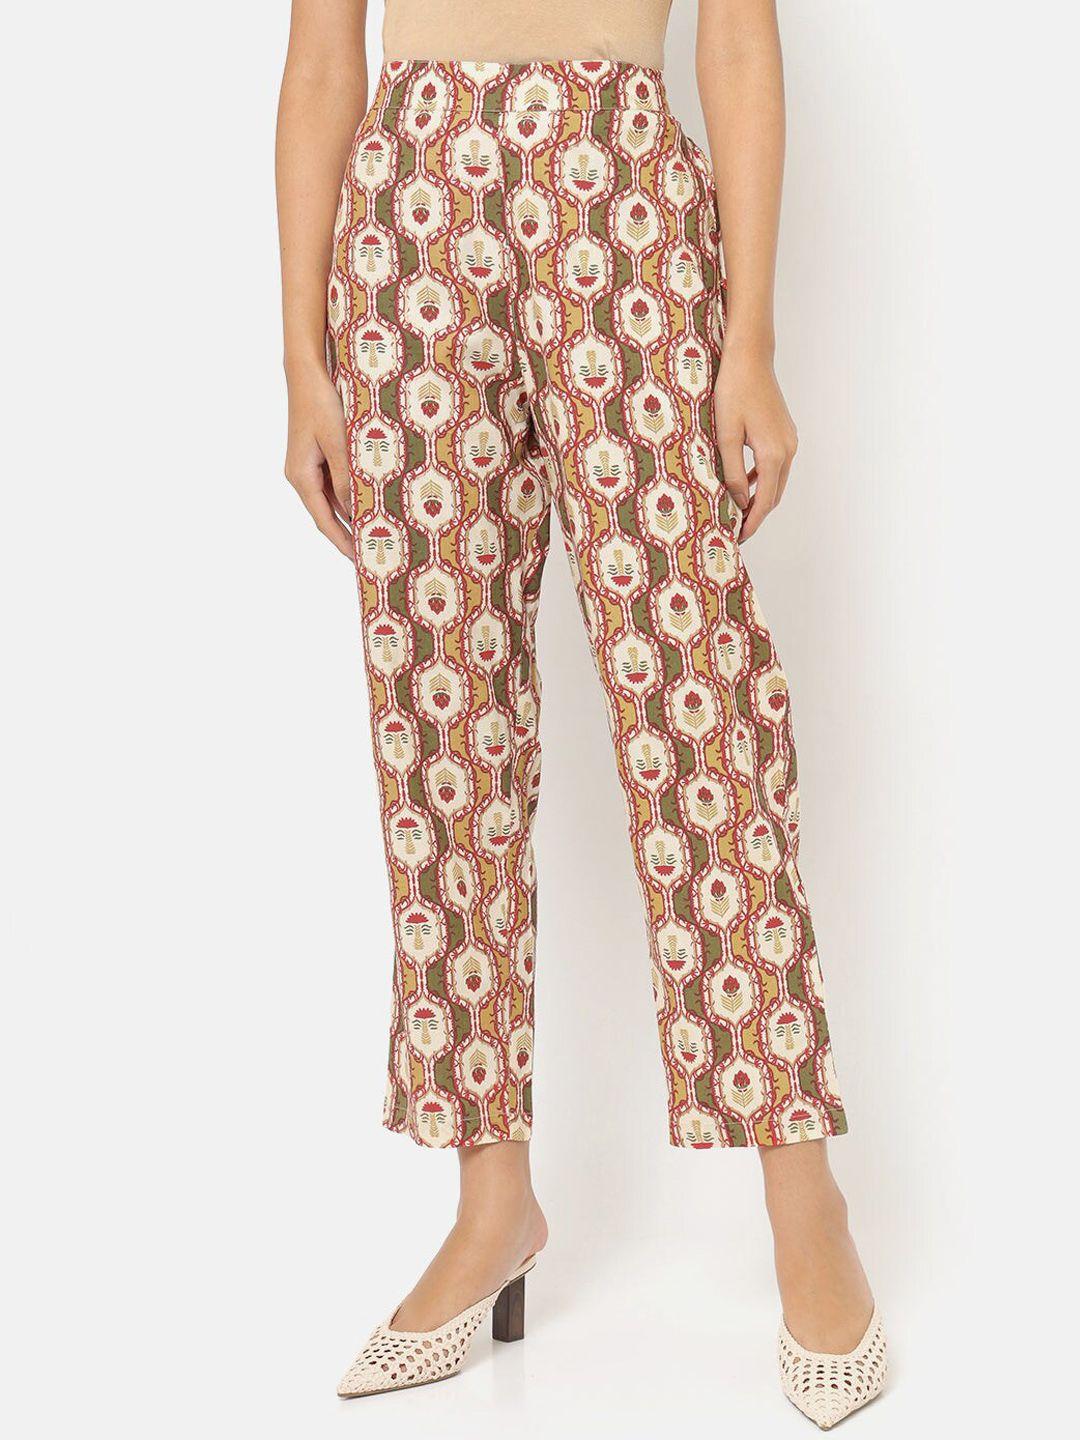 saaki-women-olive-green-floral-printed-comfort-culottes-trousers